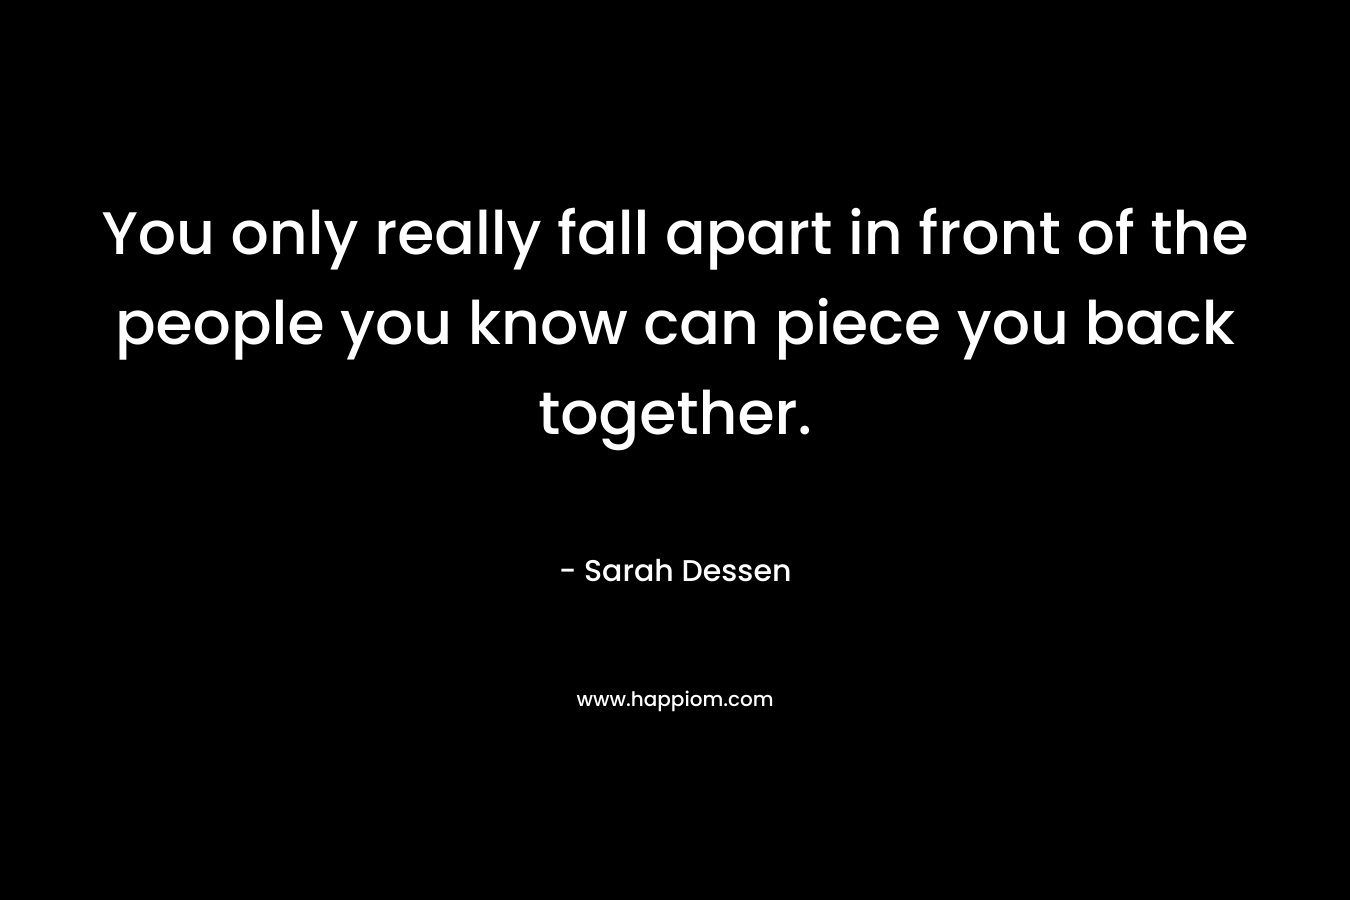 You only really fall apart in front of the people you know can piece you back together.